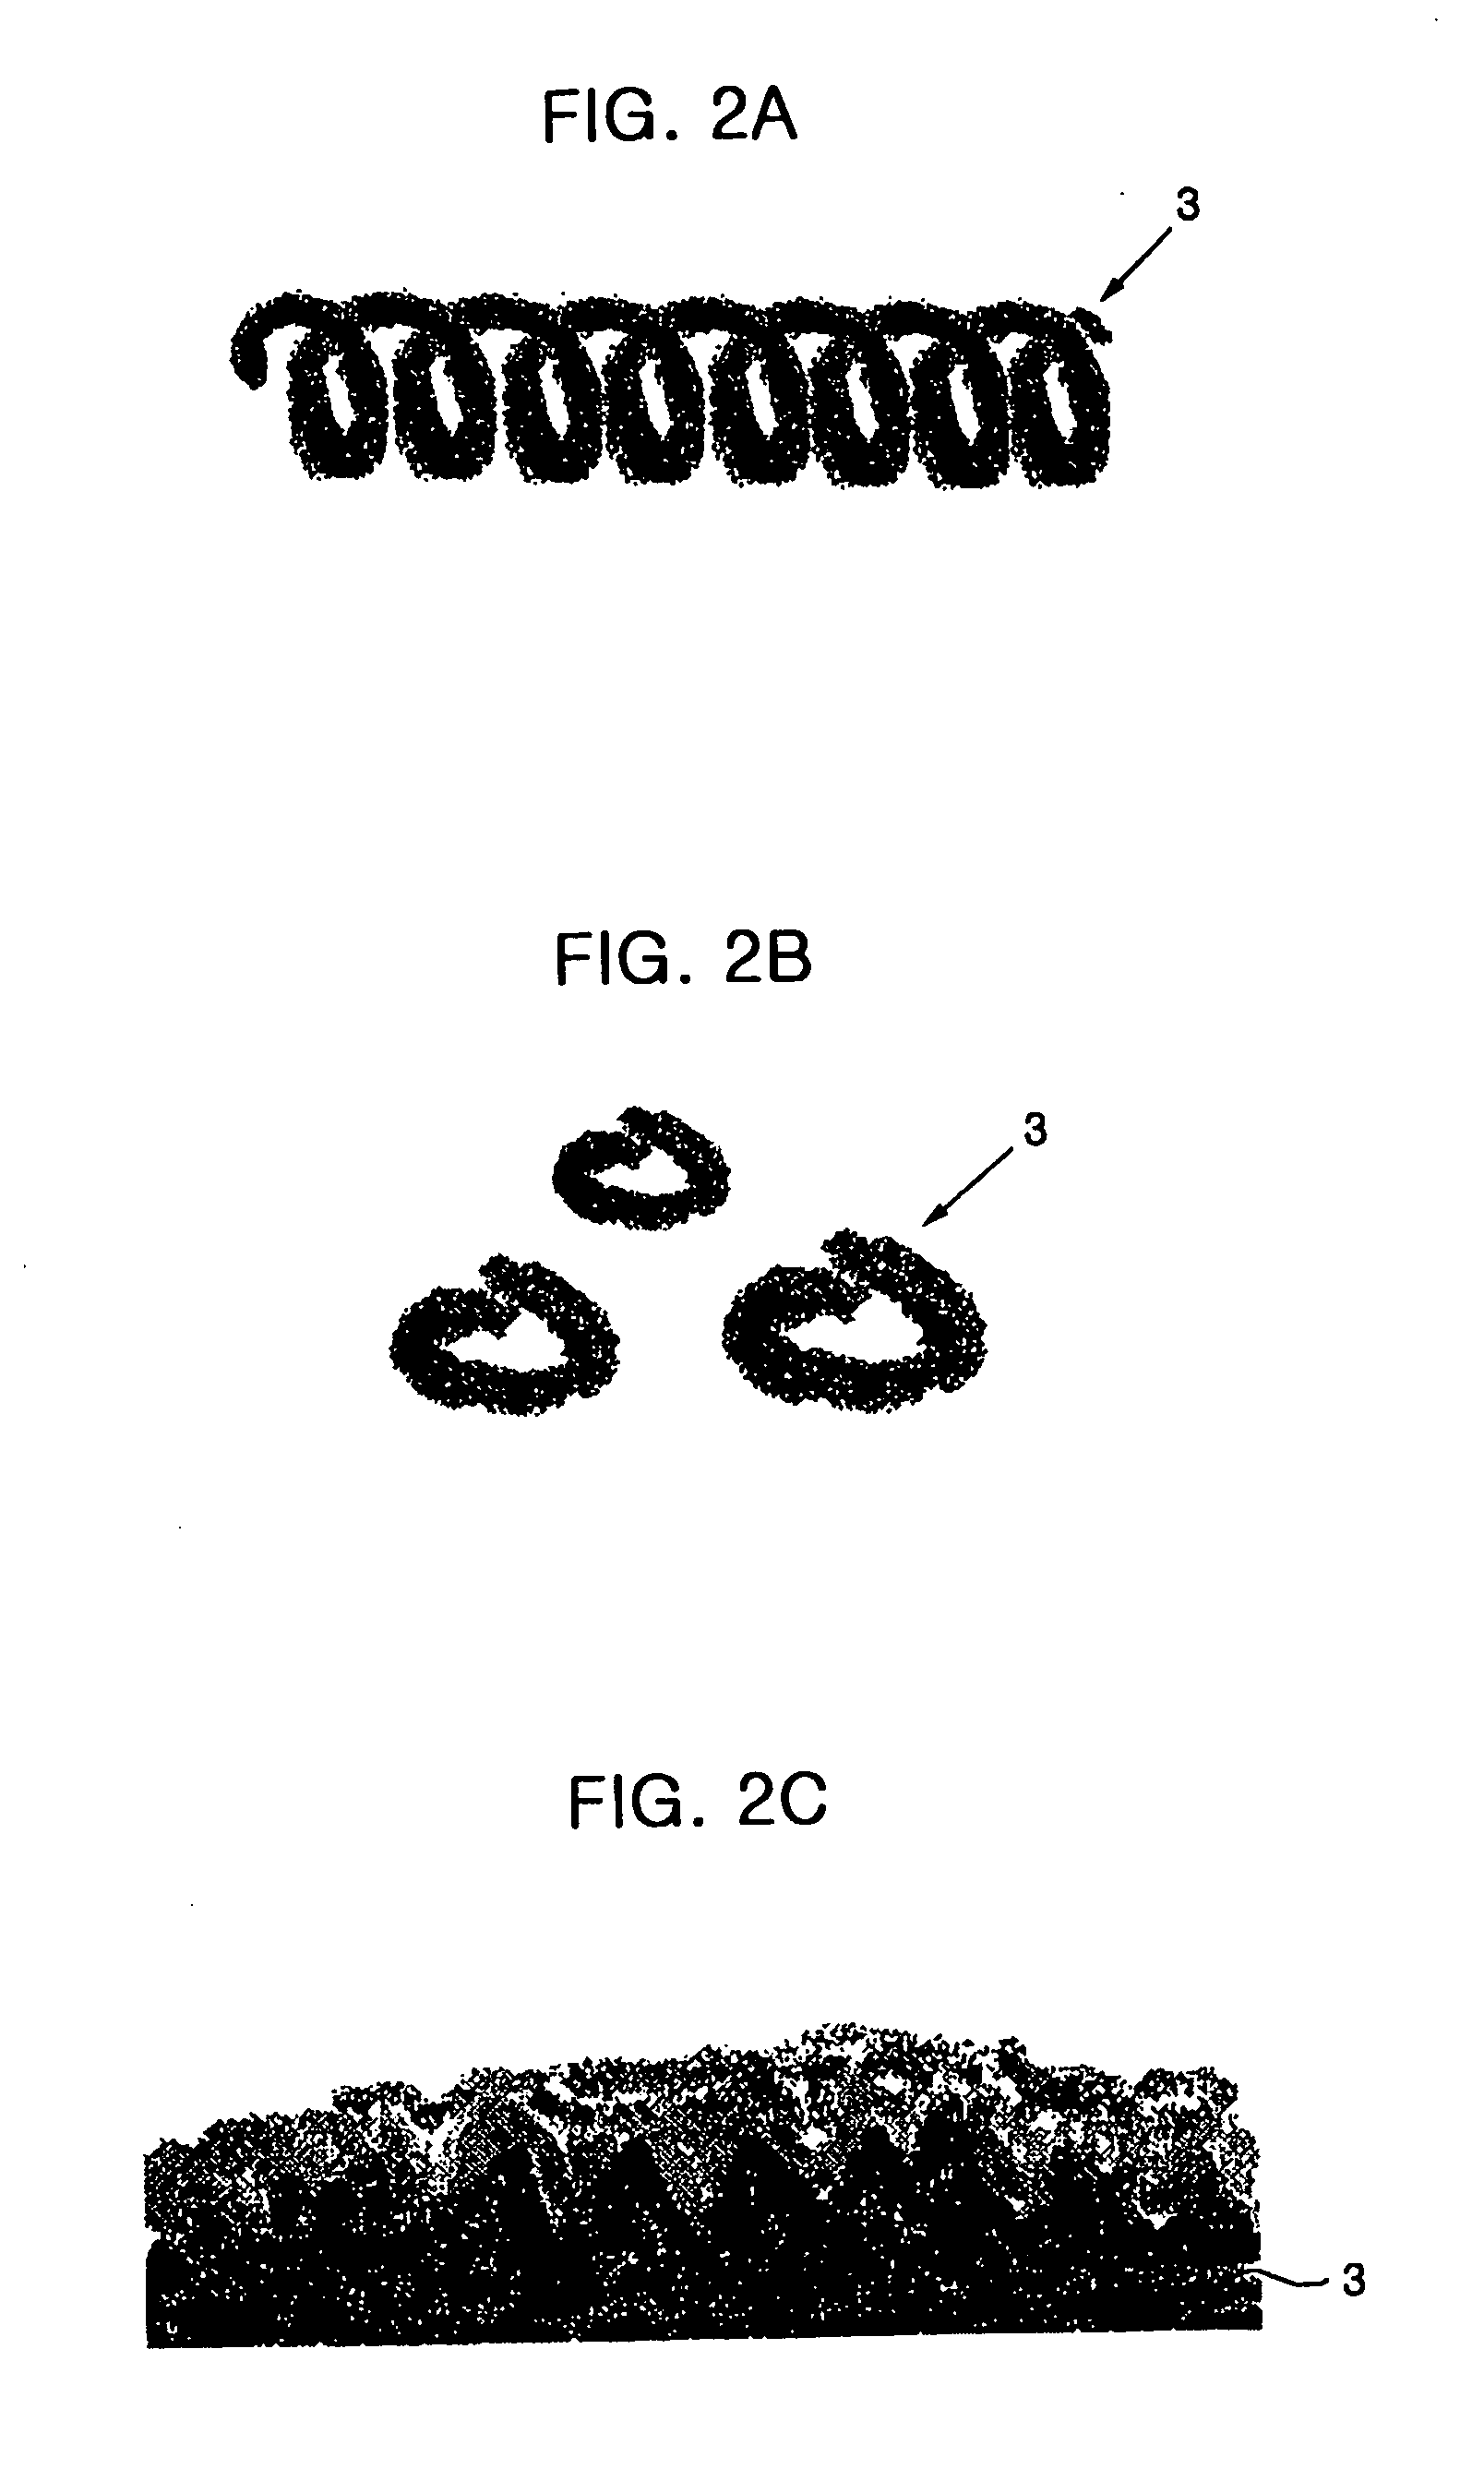 Apparatus and method for performing tertiary treatment of sewage based on porous filtering media